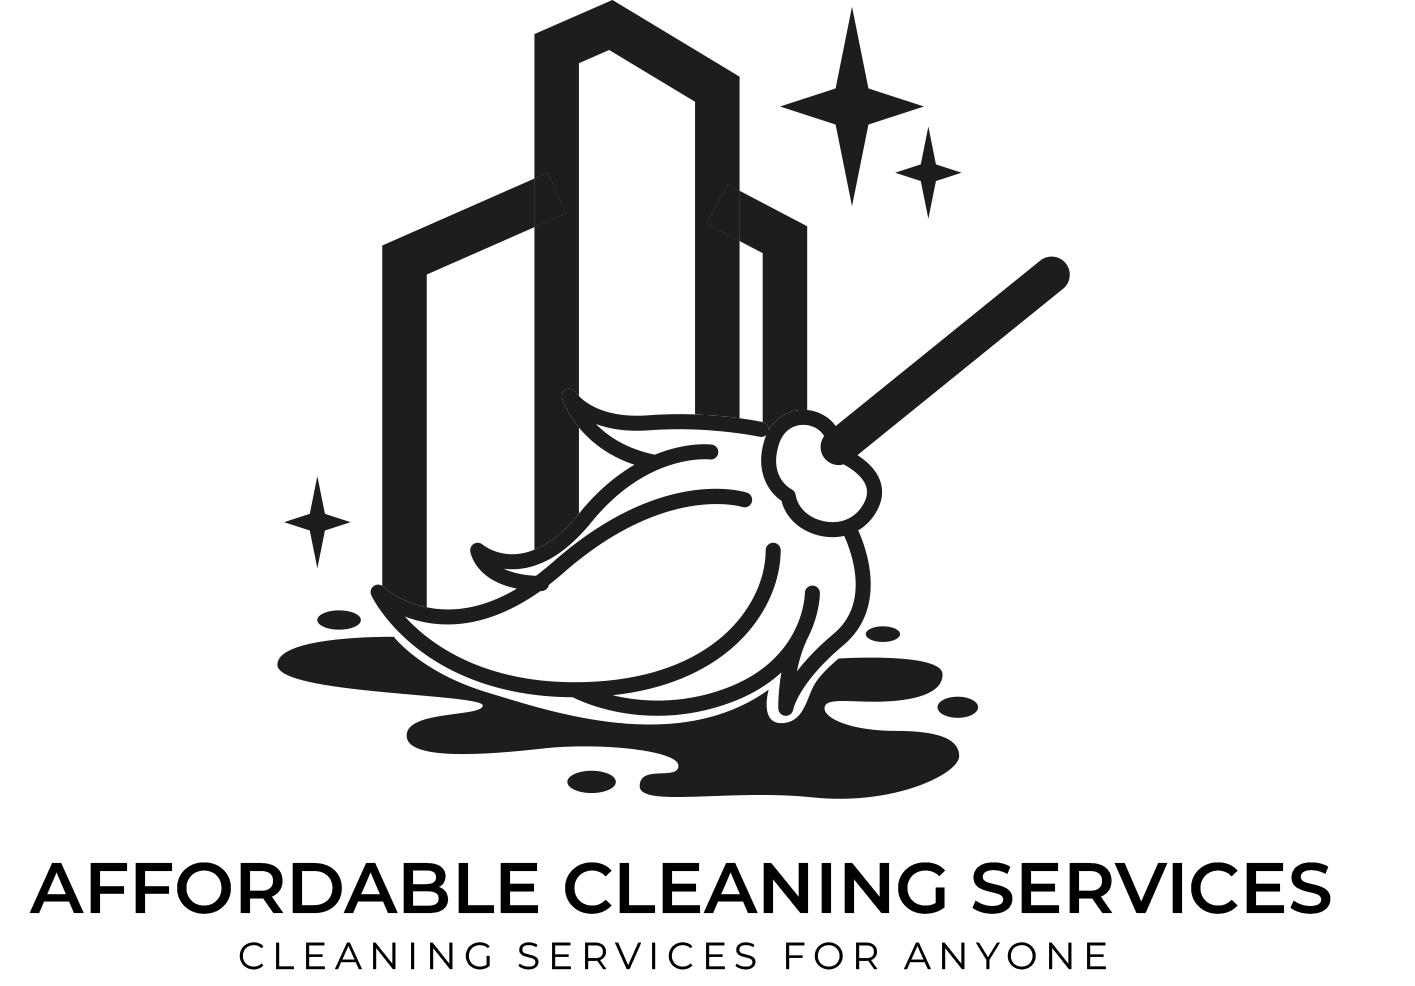 Affordable Cleaning Services - Unlicensed Contractor Logo